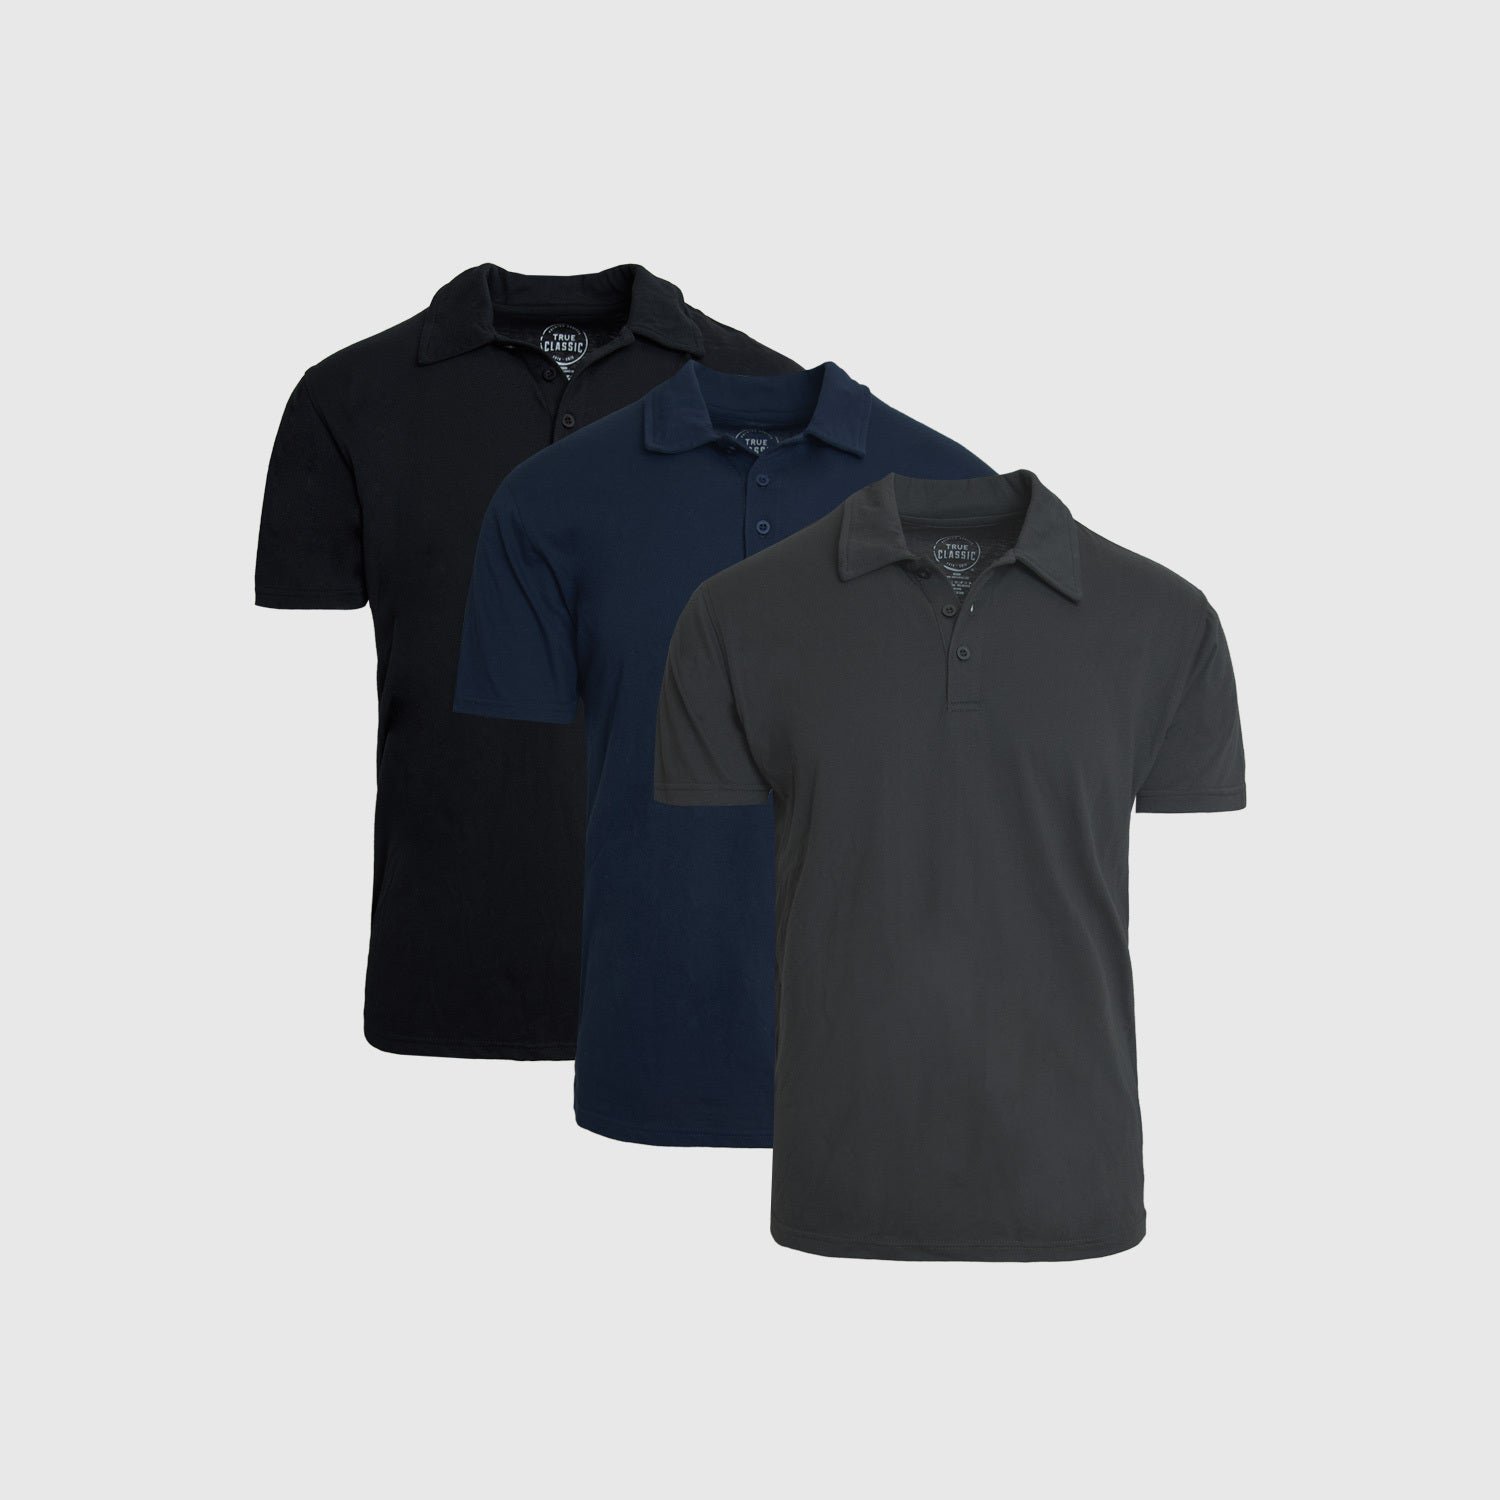 The Staple Polo 3-Pack